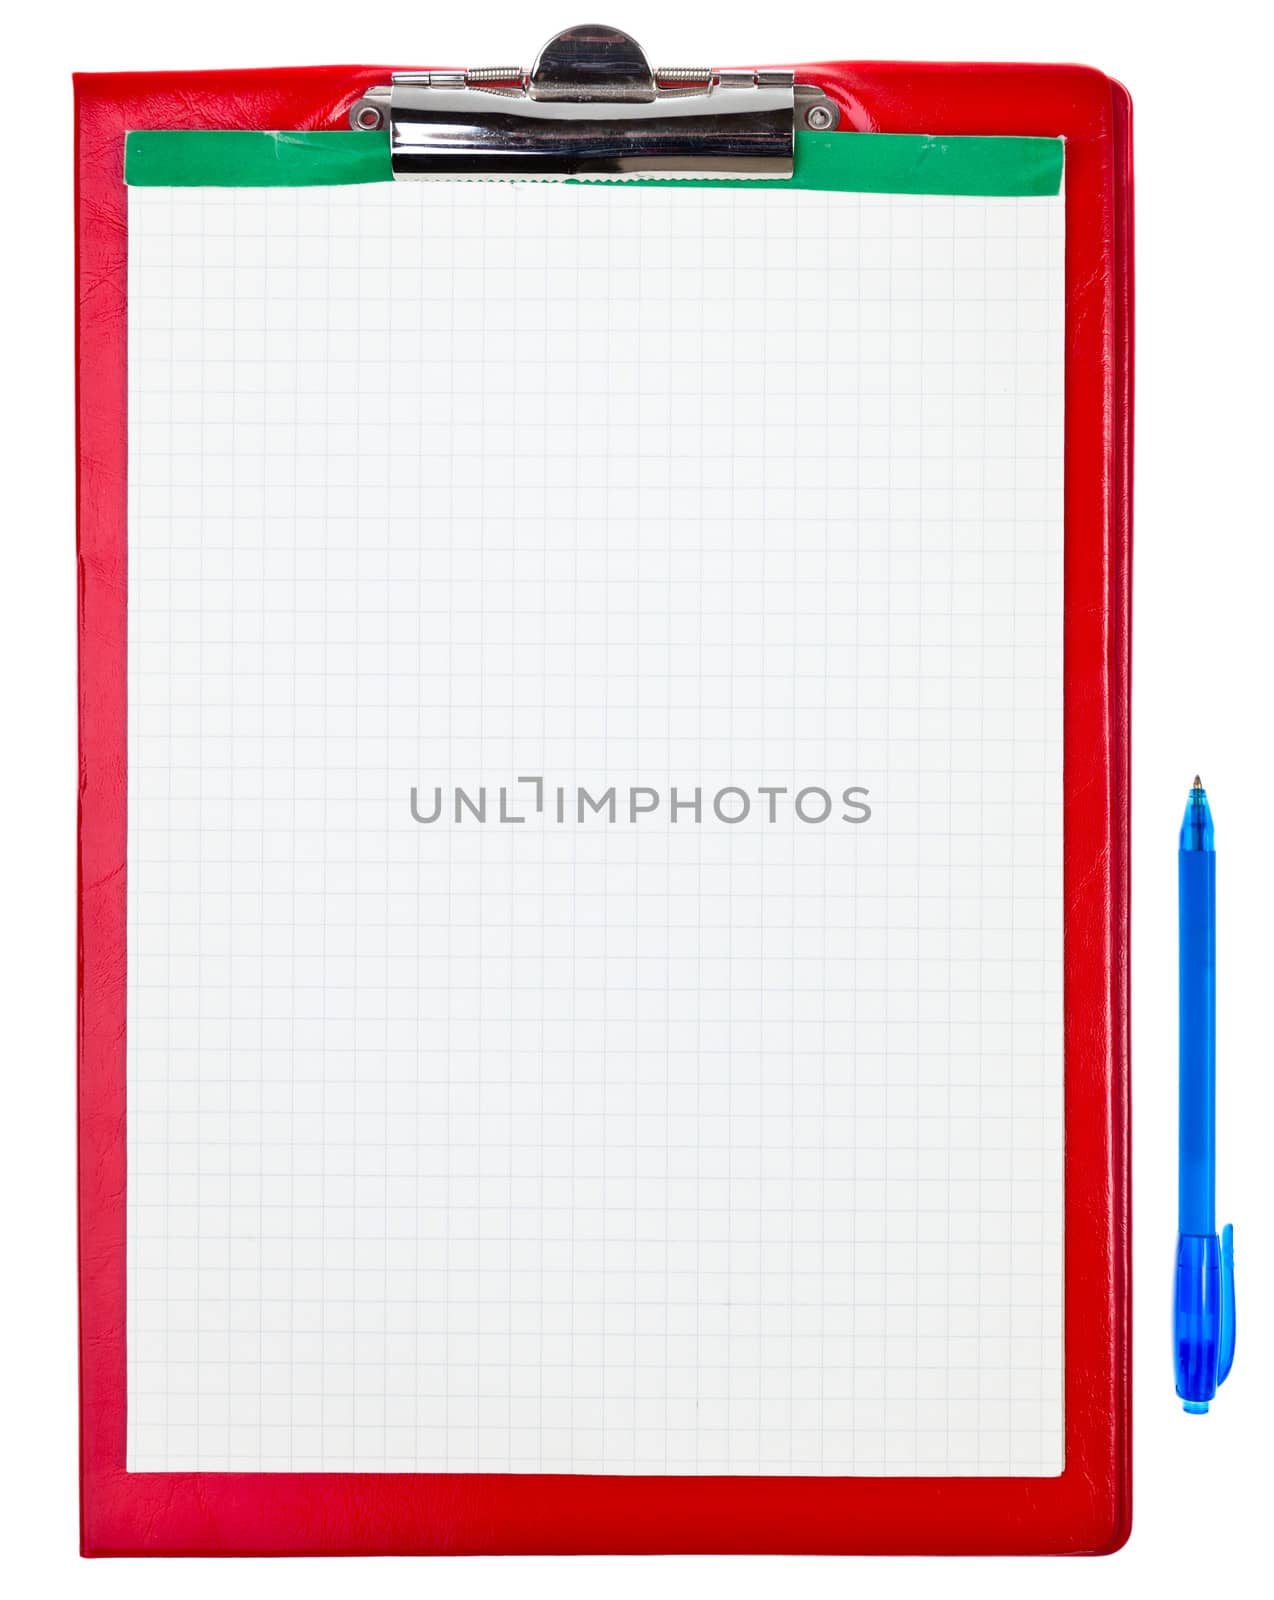 Blank paper sheet on red clipboard with pen on white background